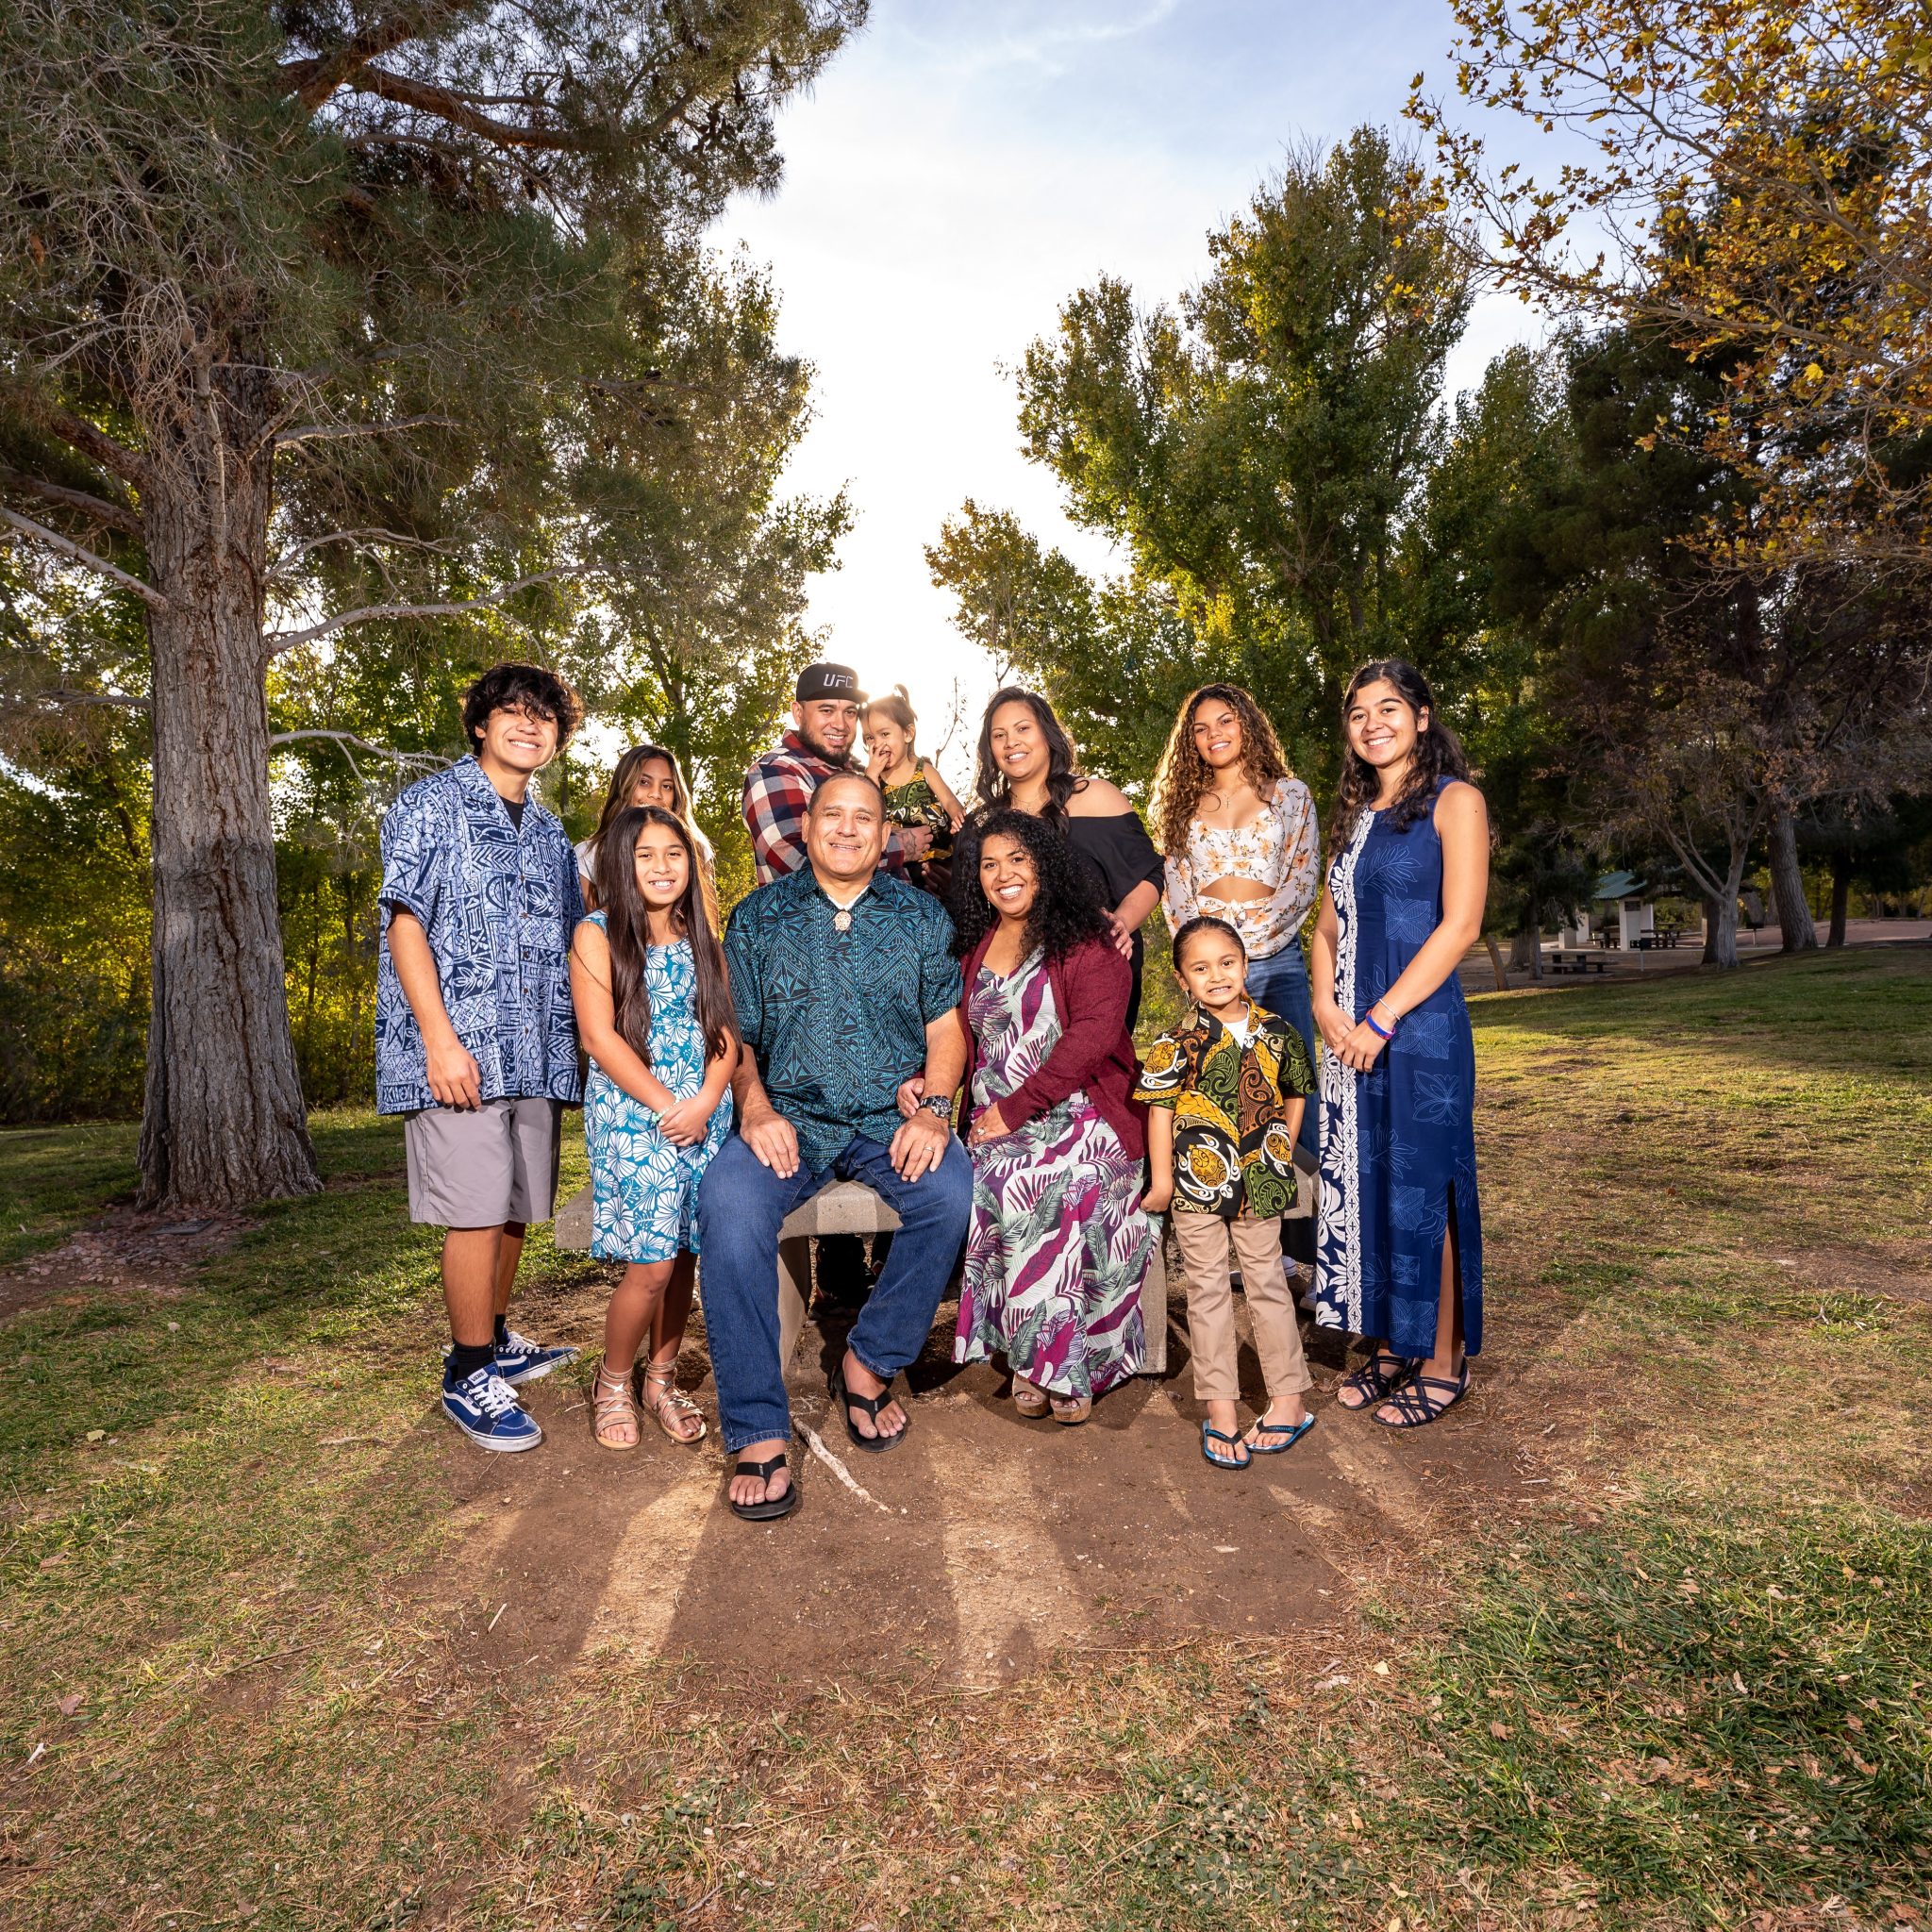 Photographers of Las Vegas Photographers Of Las Vegas Photographers of Las Vegas focus of every shoot is capturing your vision. We work together to bring your memories to life. 37